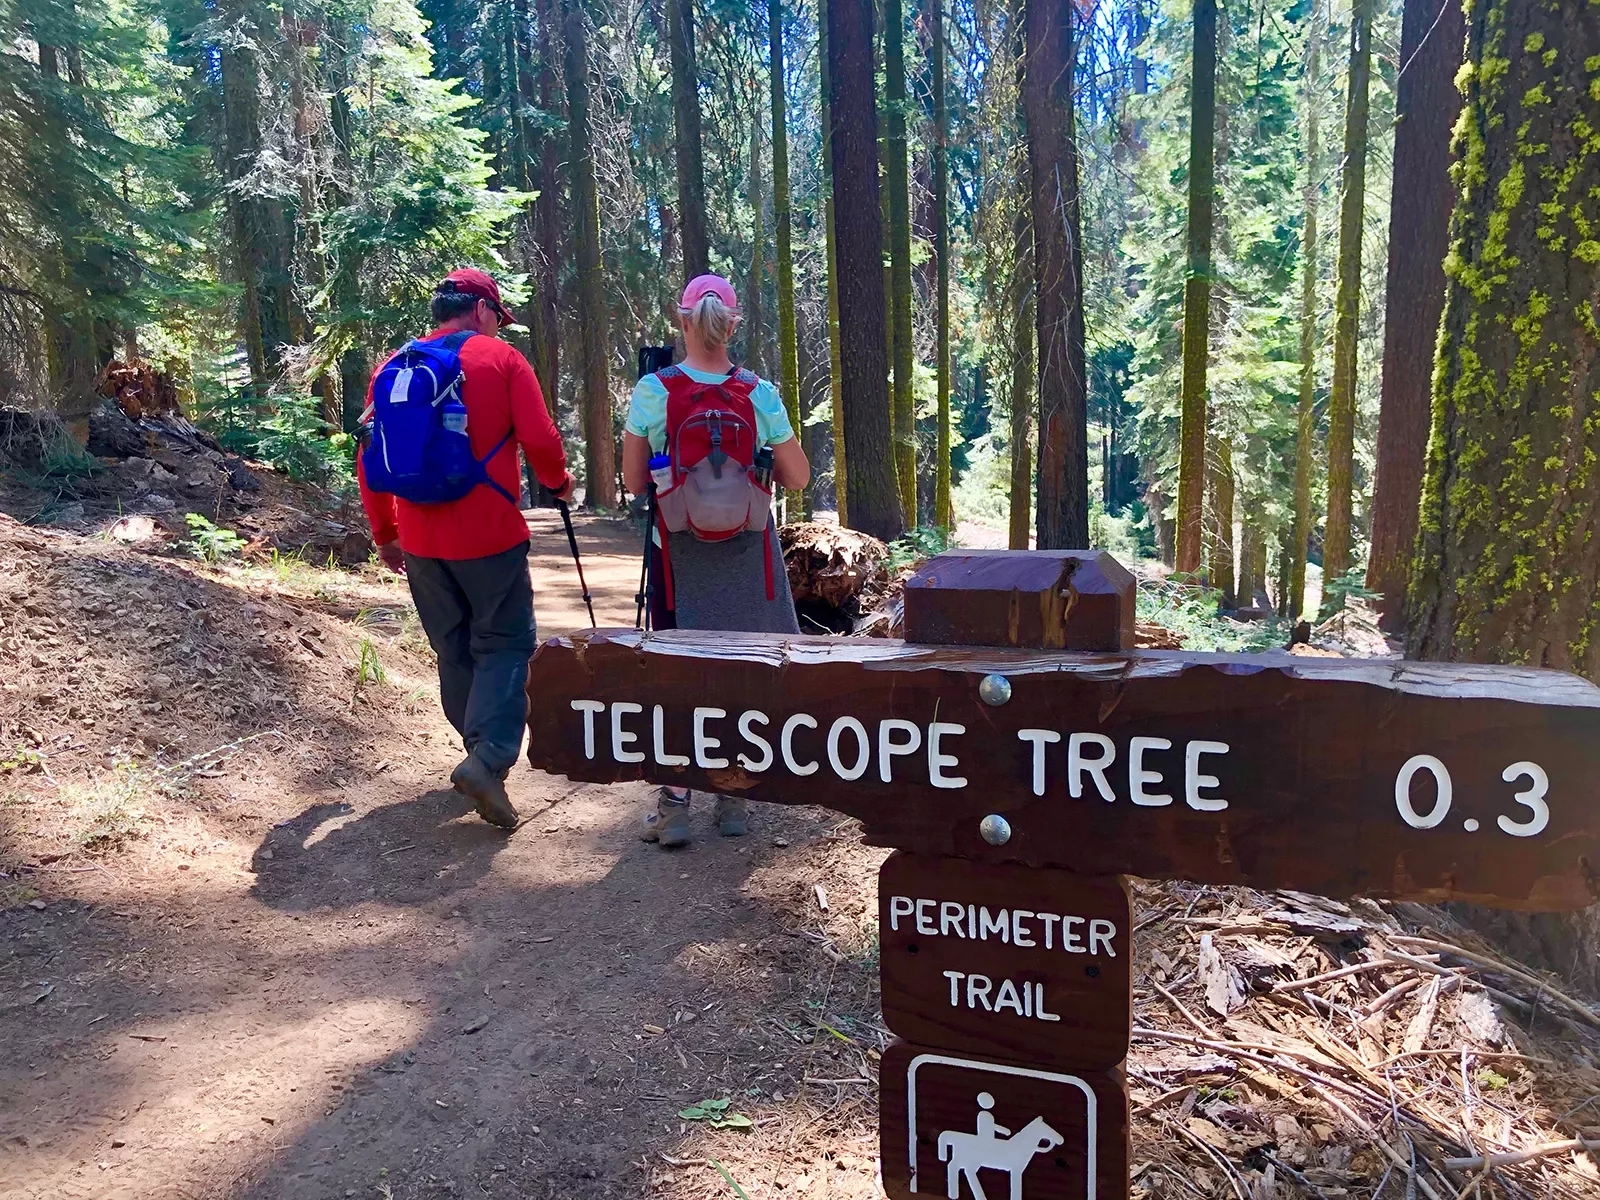 Sign for the &quot;TELESOPE TREE&quot;, guests walking past it.